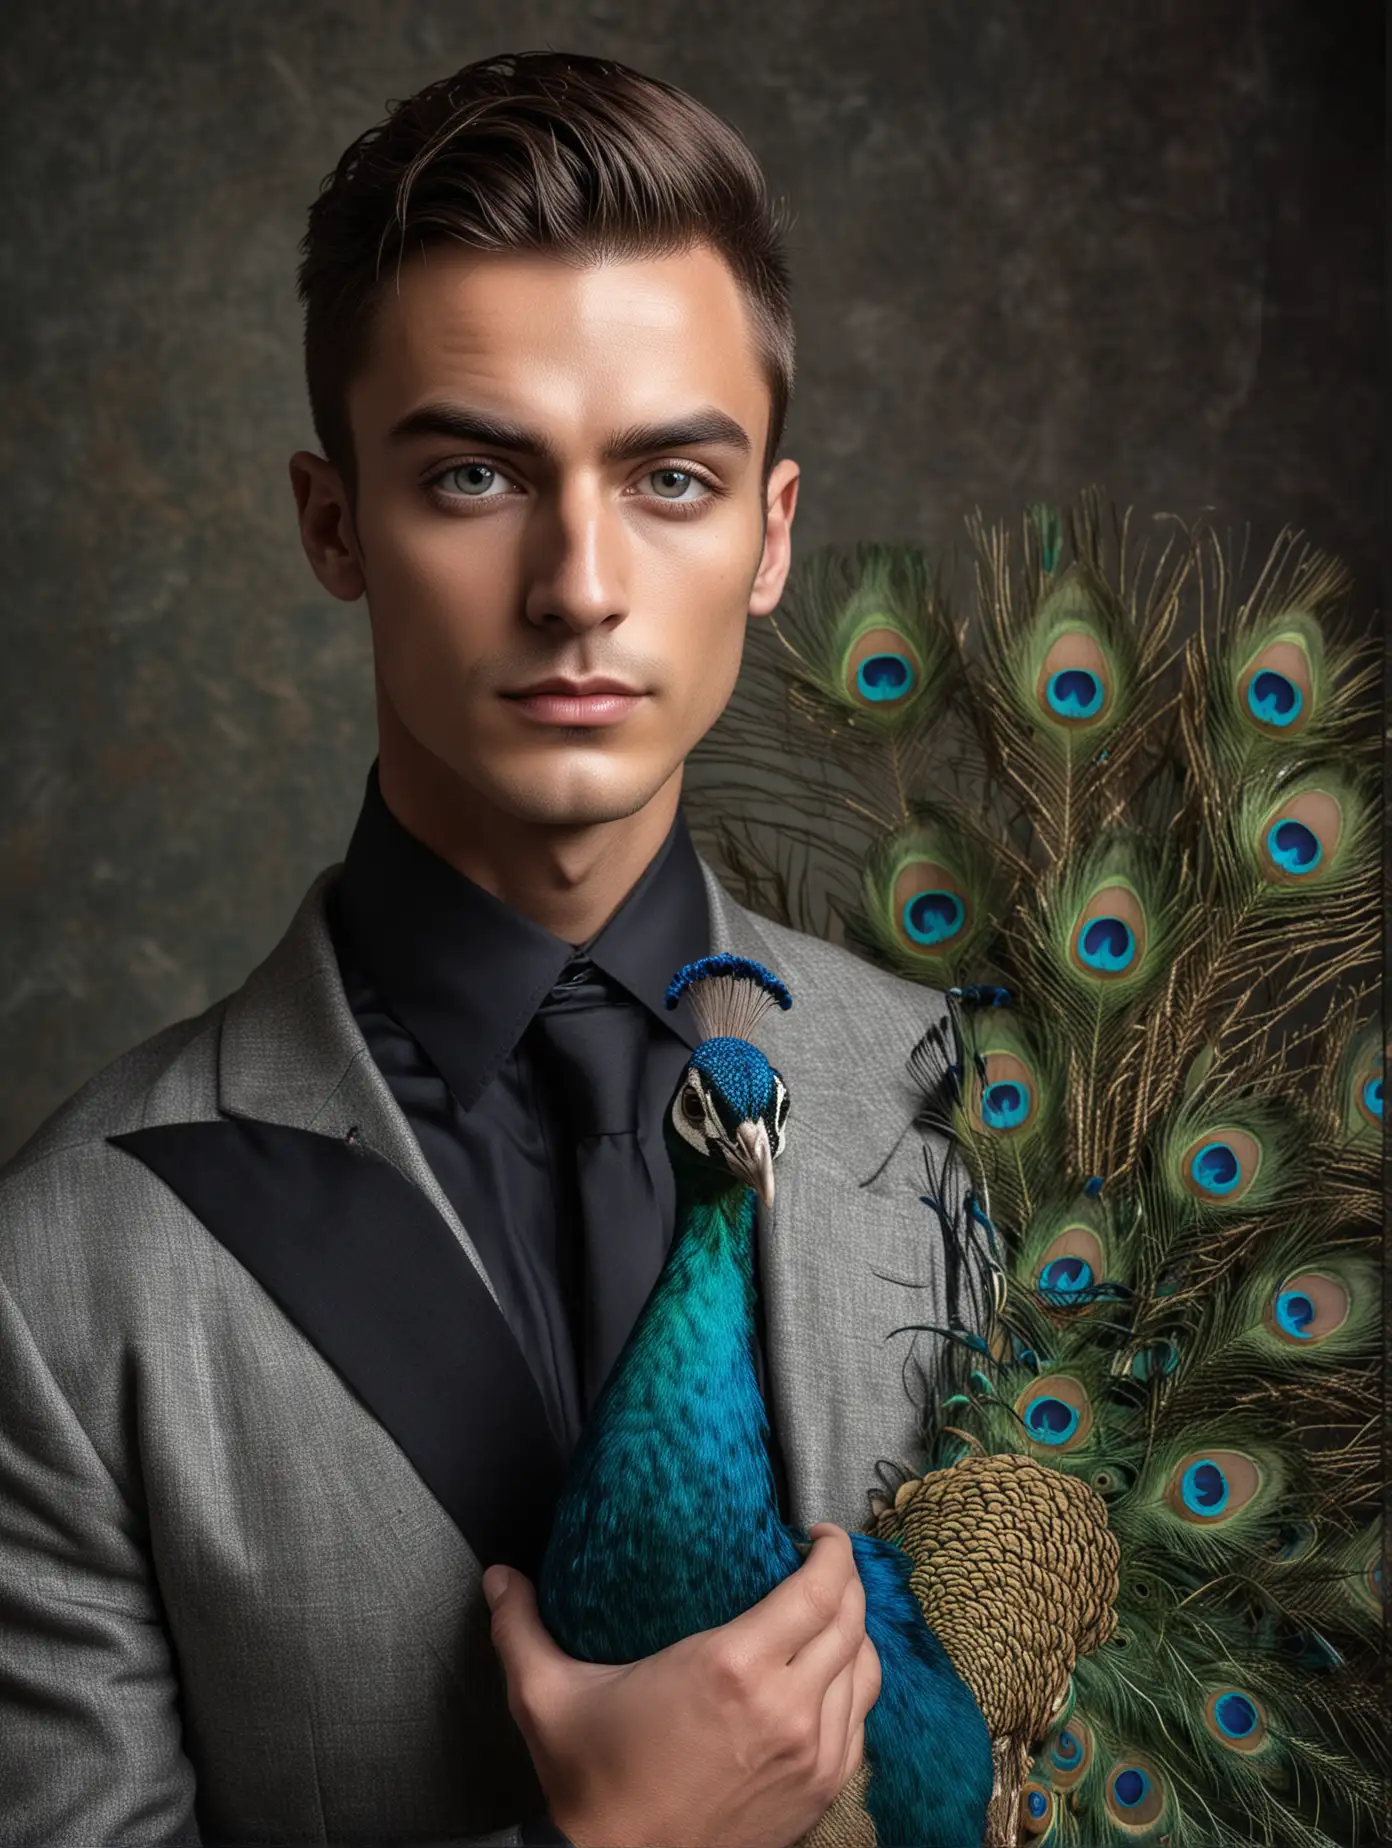 A photo of a beautiful  man and a peacock, exquisite facial features, professional photography technology, full body portrait